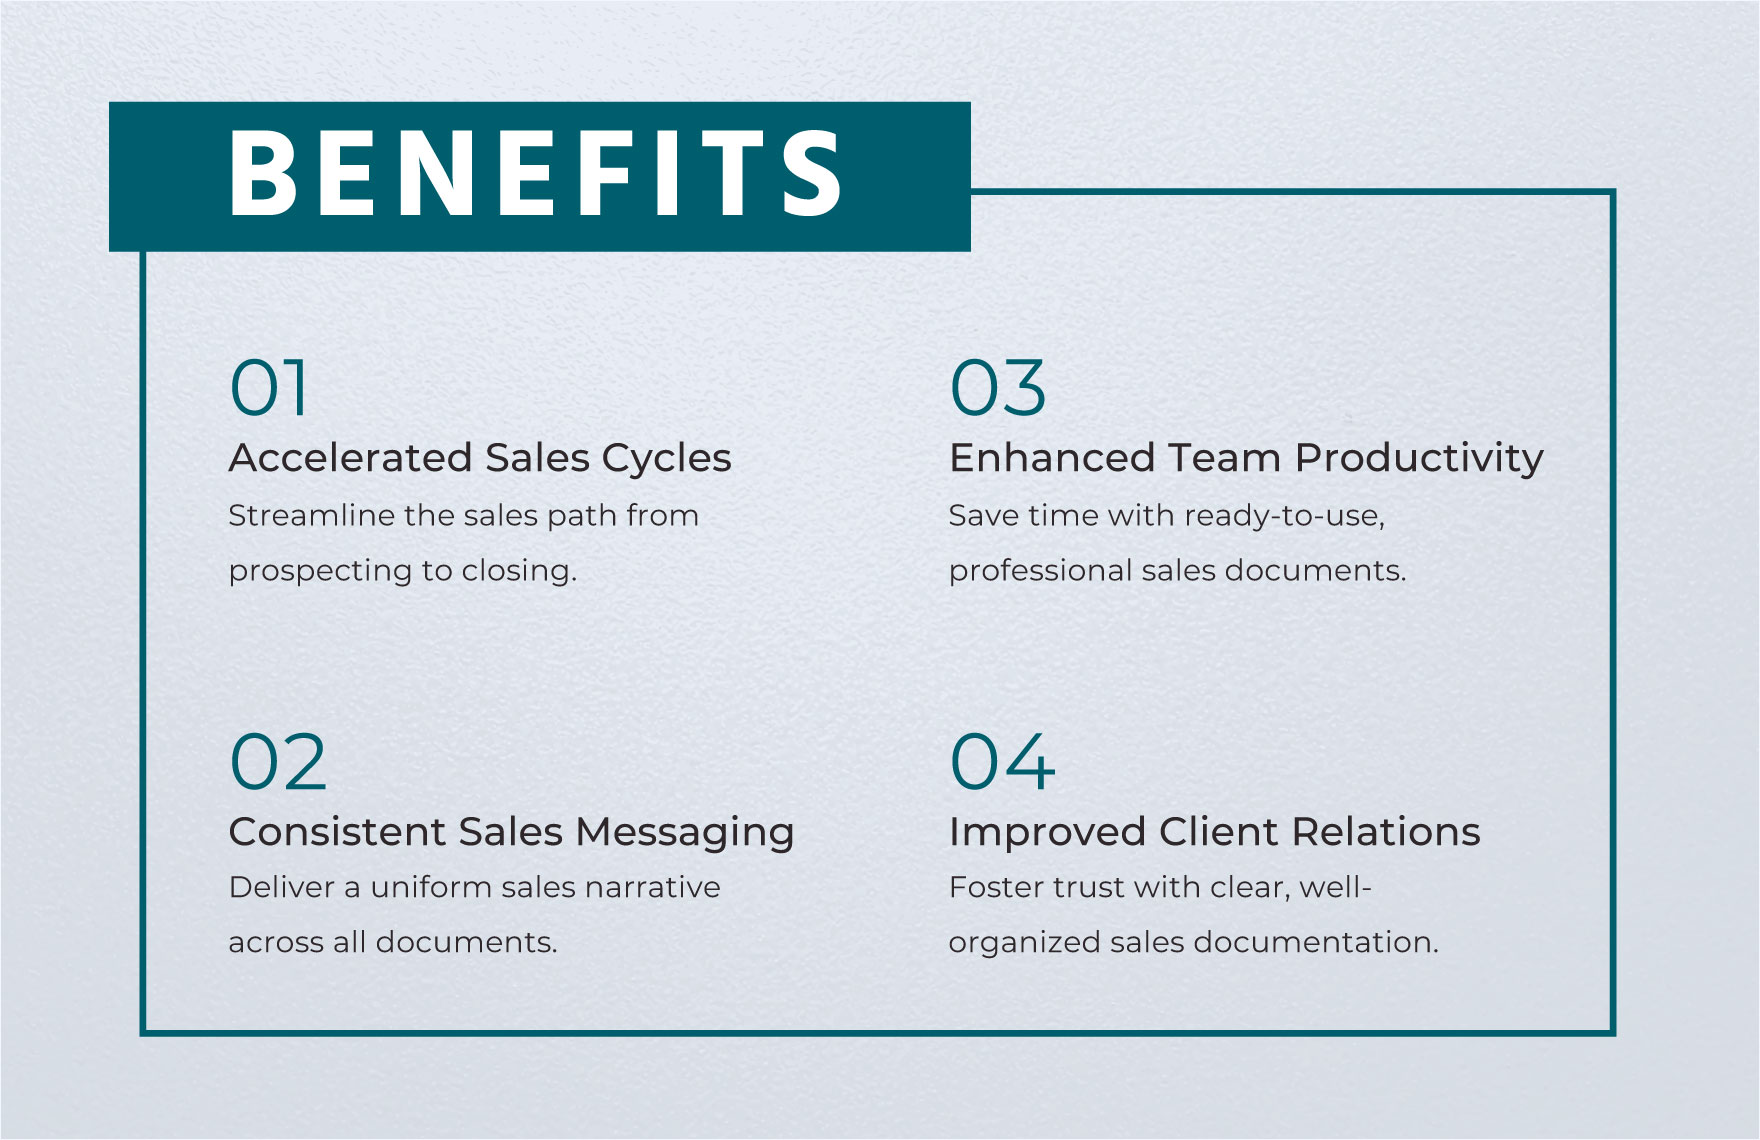 Sales Client-Centric Sales Strategy Study Template